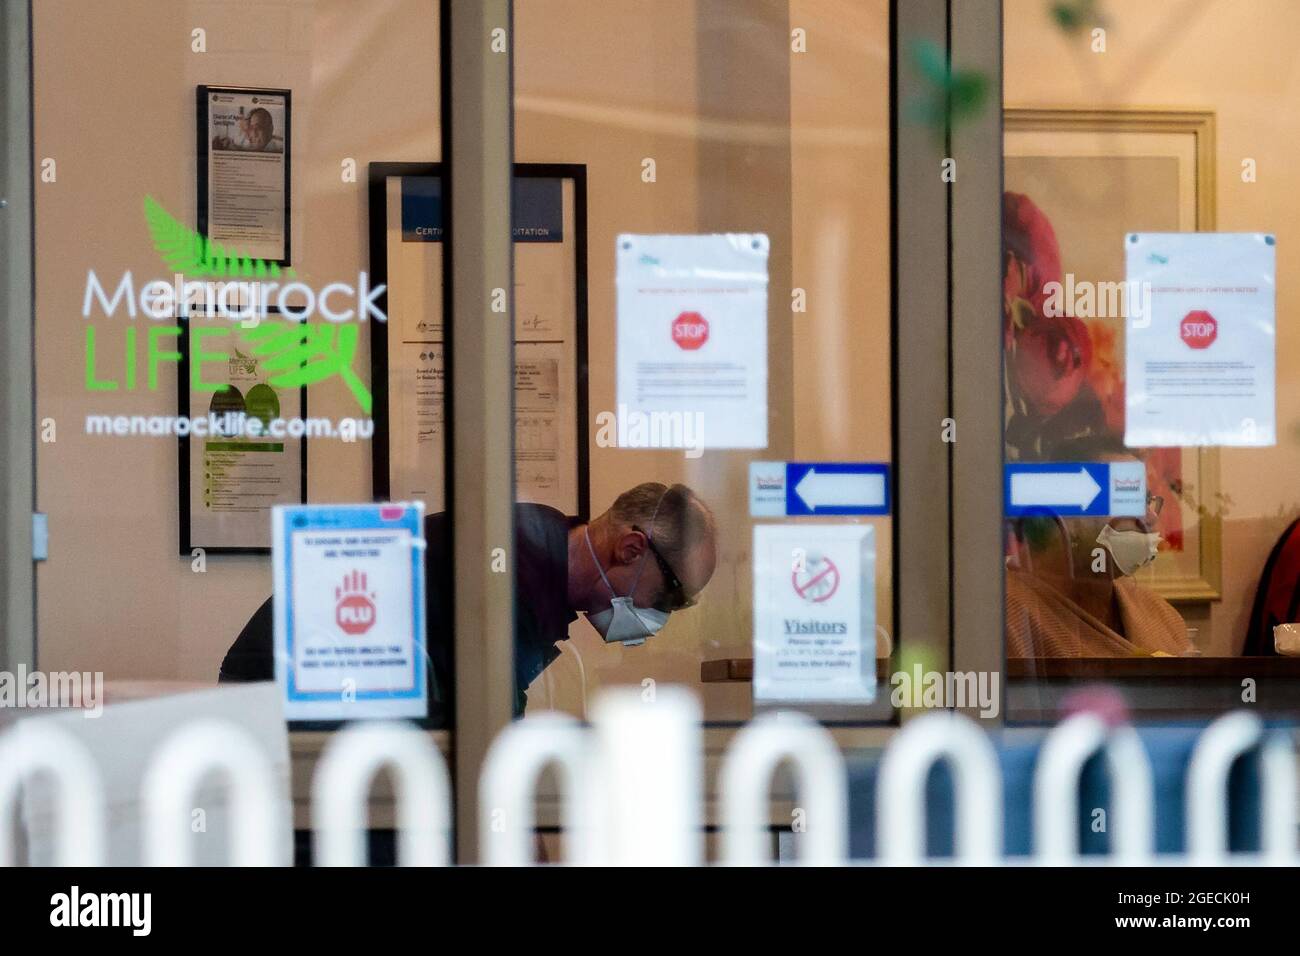 Melbourne, Australia, 14 July, 2020. Cleaners are seen inside the main reception of The Menarock Life Essendon aged care facility which has seen 31 people test positive to coronavirus during COVID-19. After another horror 24 hours of 270 COVID-19 cases, bringing Victoria’s active cases to over 1800, speculation is rising that almost all of Victoria’s current cases stem from the Andrews Government botched hotel quarantine scheme.  Victoria is losing control of clusters as they start spreading through nursing homes, where our most vulnerable live. (Photo be Dave Hewison/ Speed Media) Credit: Dav Stock Photo